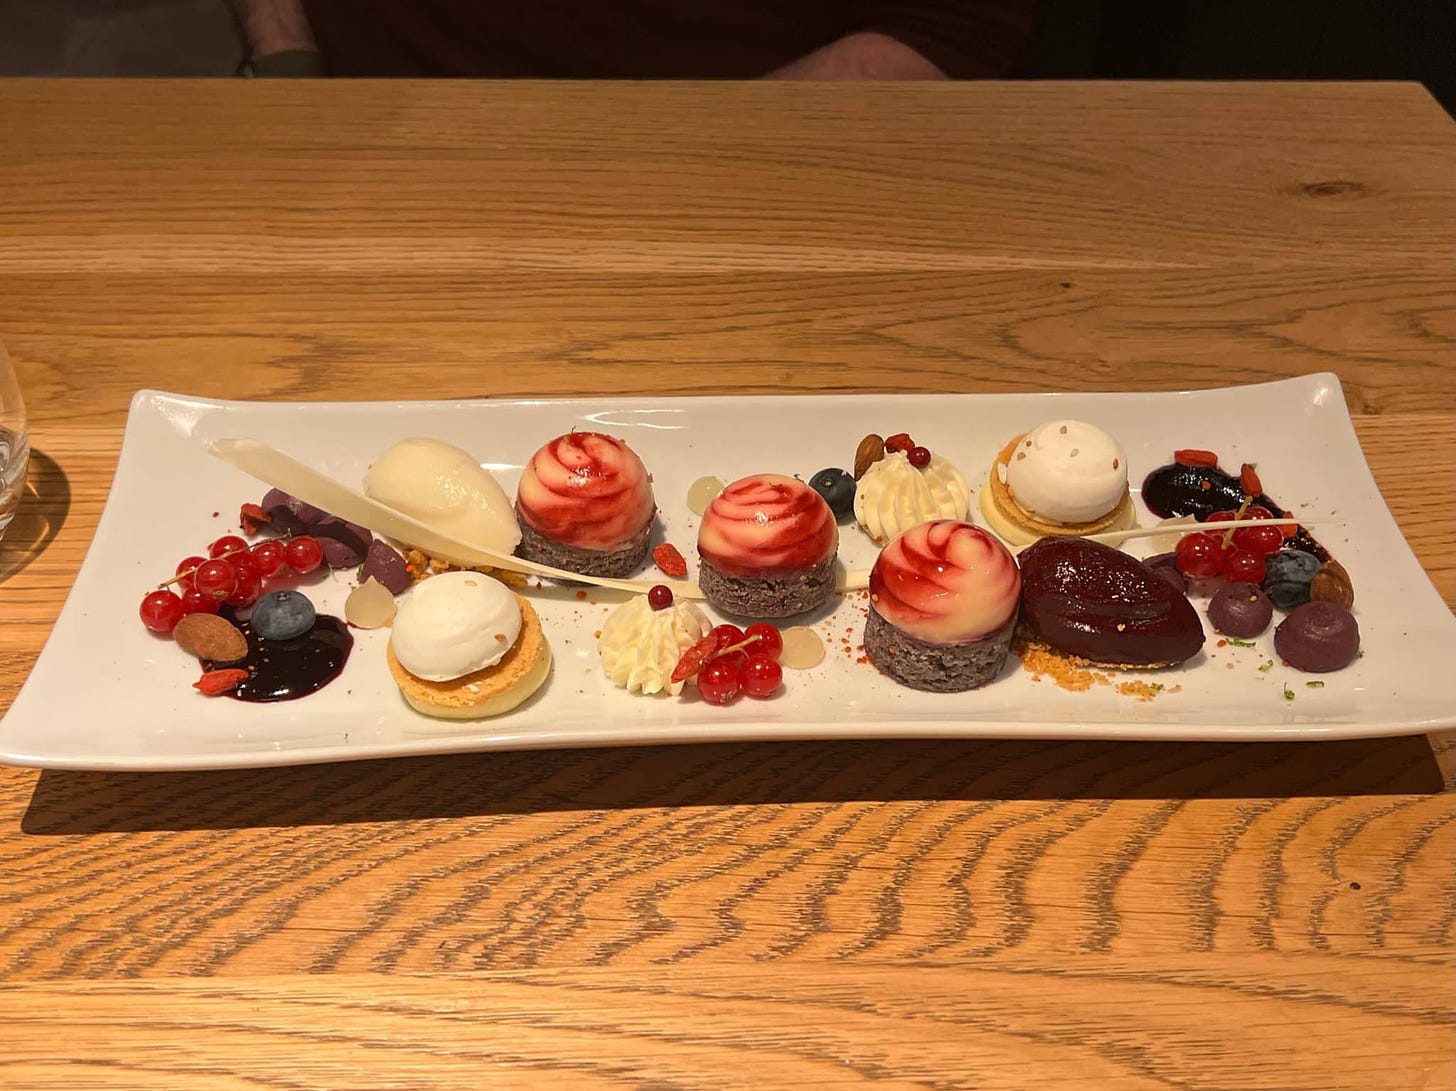 A dessert plate with miniature sweets of some sort.